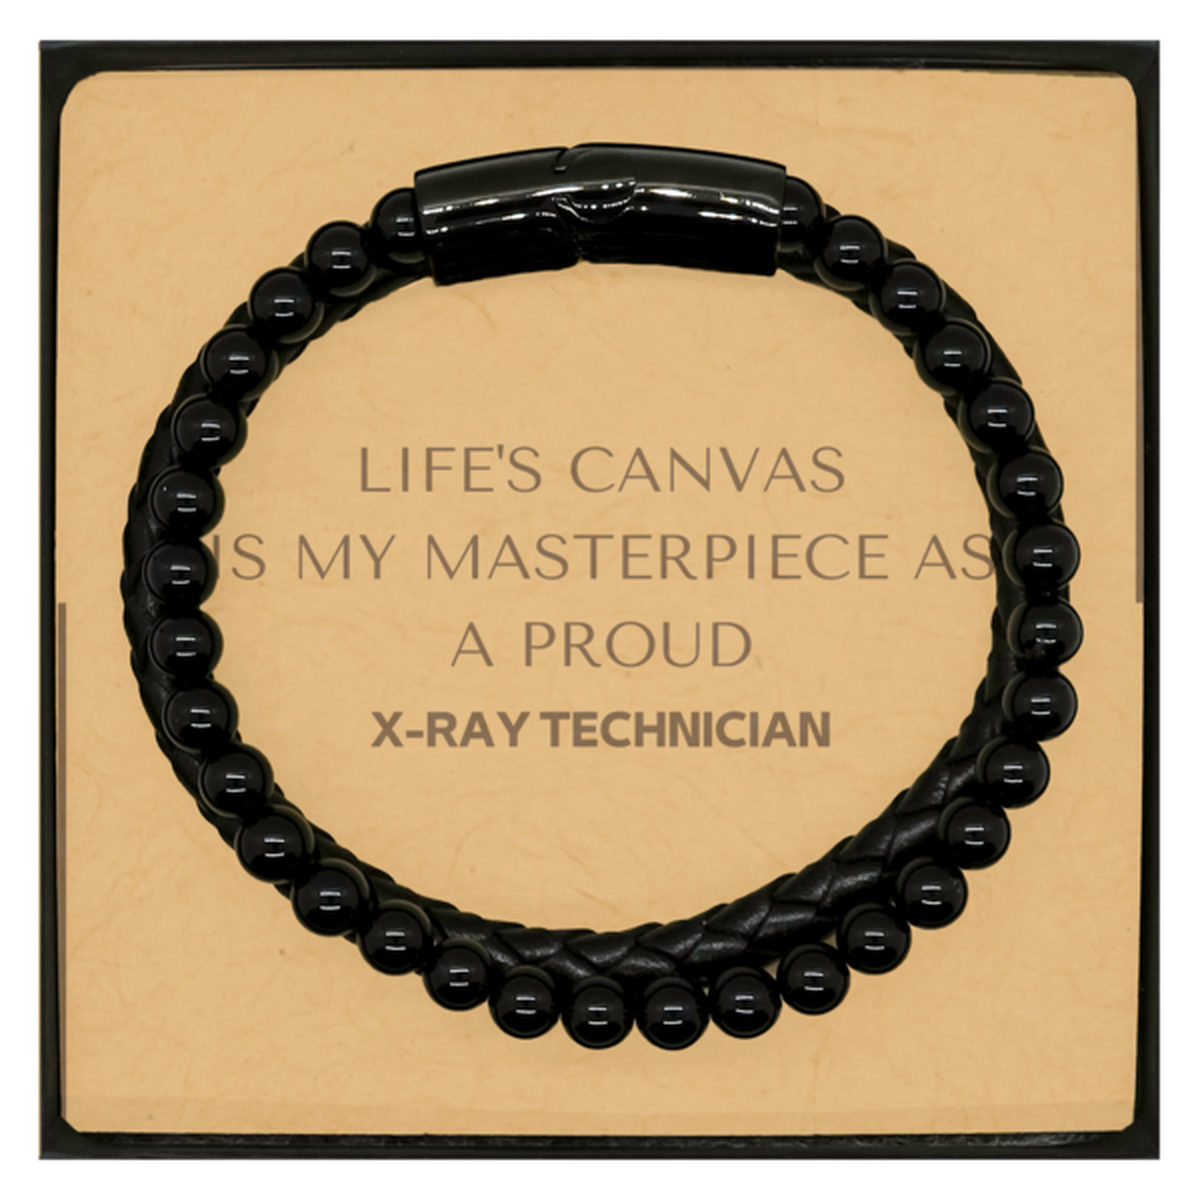 Proud X-Ray Technician Gifts, Life's canvas is my masterpiece, Epic Birthday Christmas Unique Stone Leather Bracelets For X-Ray Technician, Coworkers, Men, Women, Friends